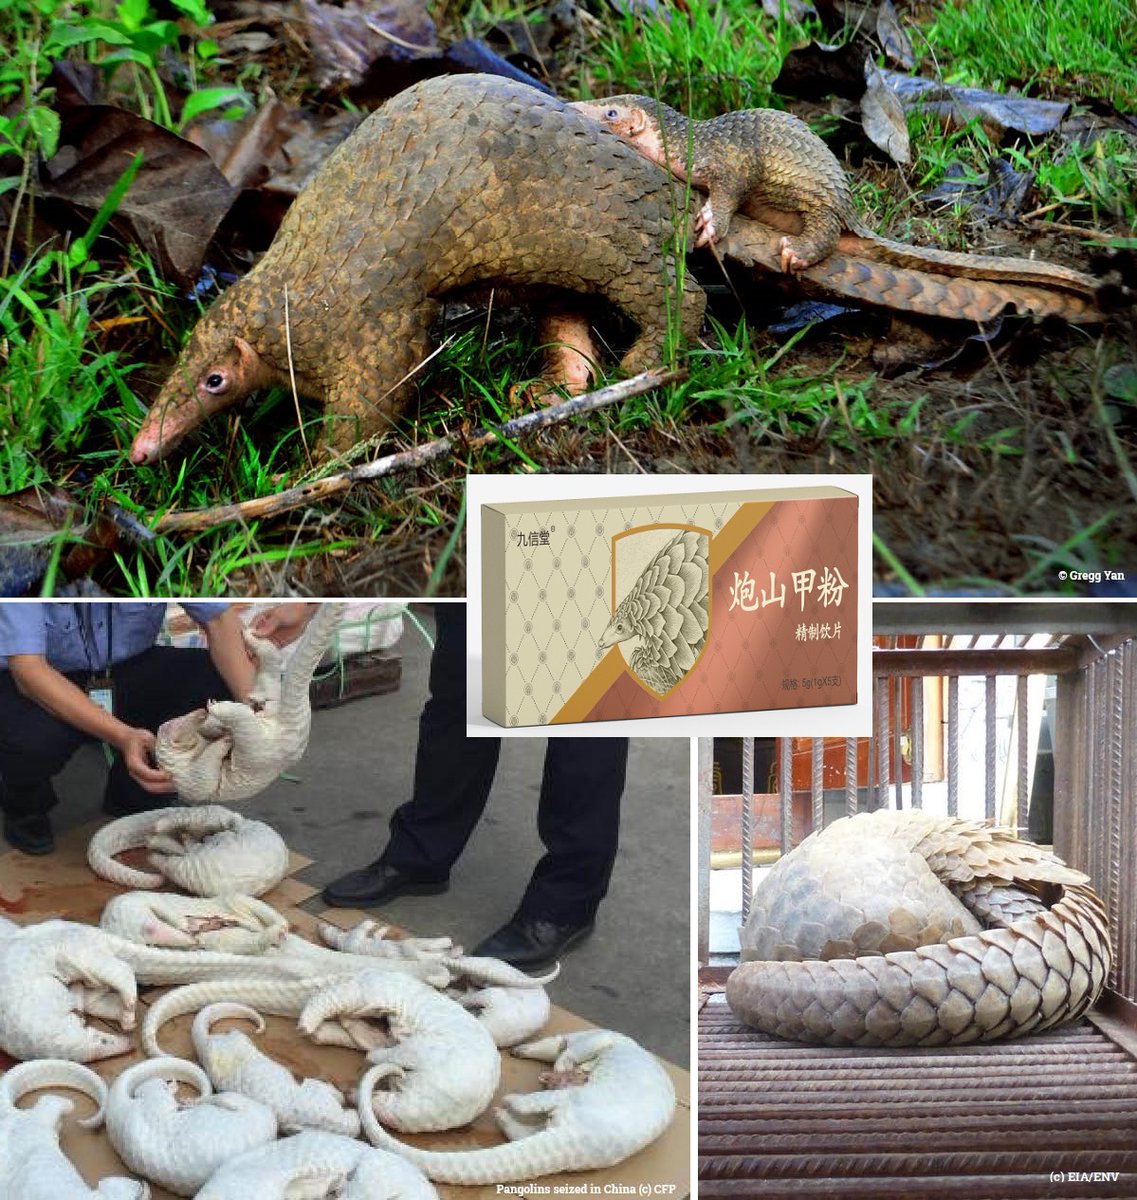 Everything you ever wanted to know about ... illegal pangolin trade Find out more about the world's most trafficked animal, where they're found, why they're poached and what EIA is doing about it Get the facts at ow.ly/lVWB50Q8QKp #illegalwildlifetrade #pangolins